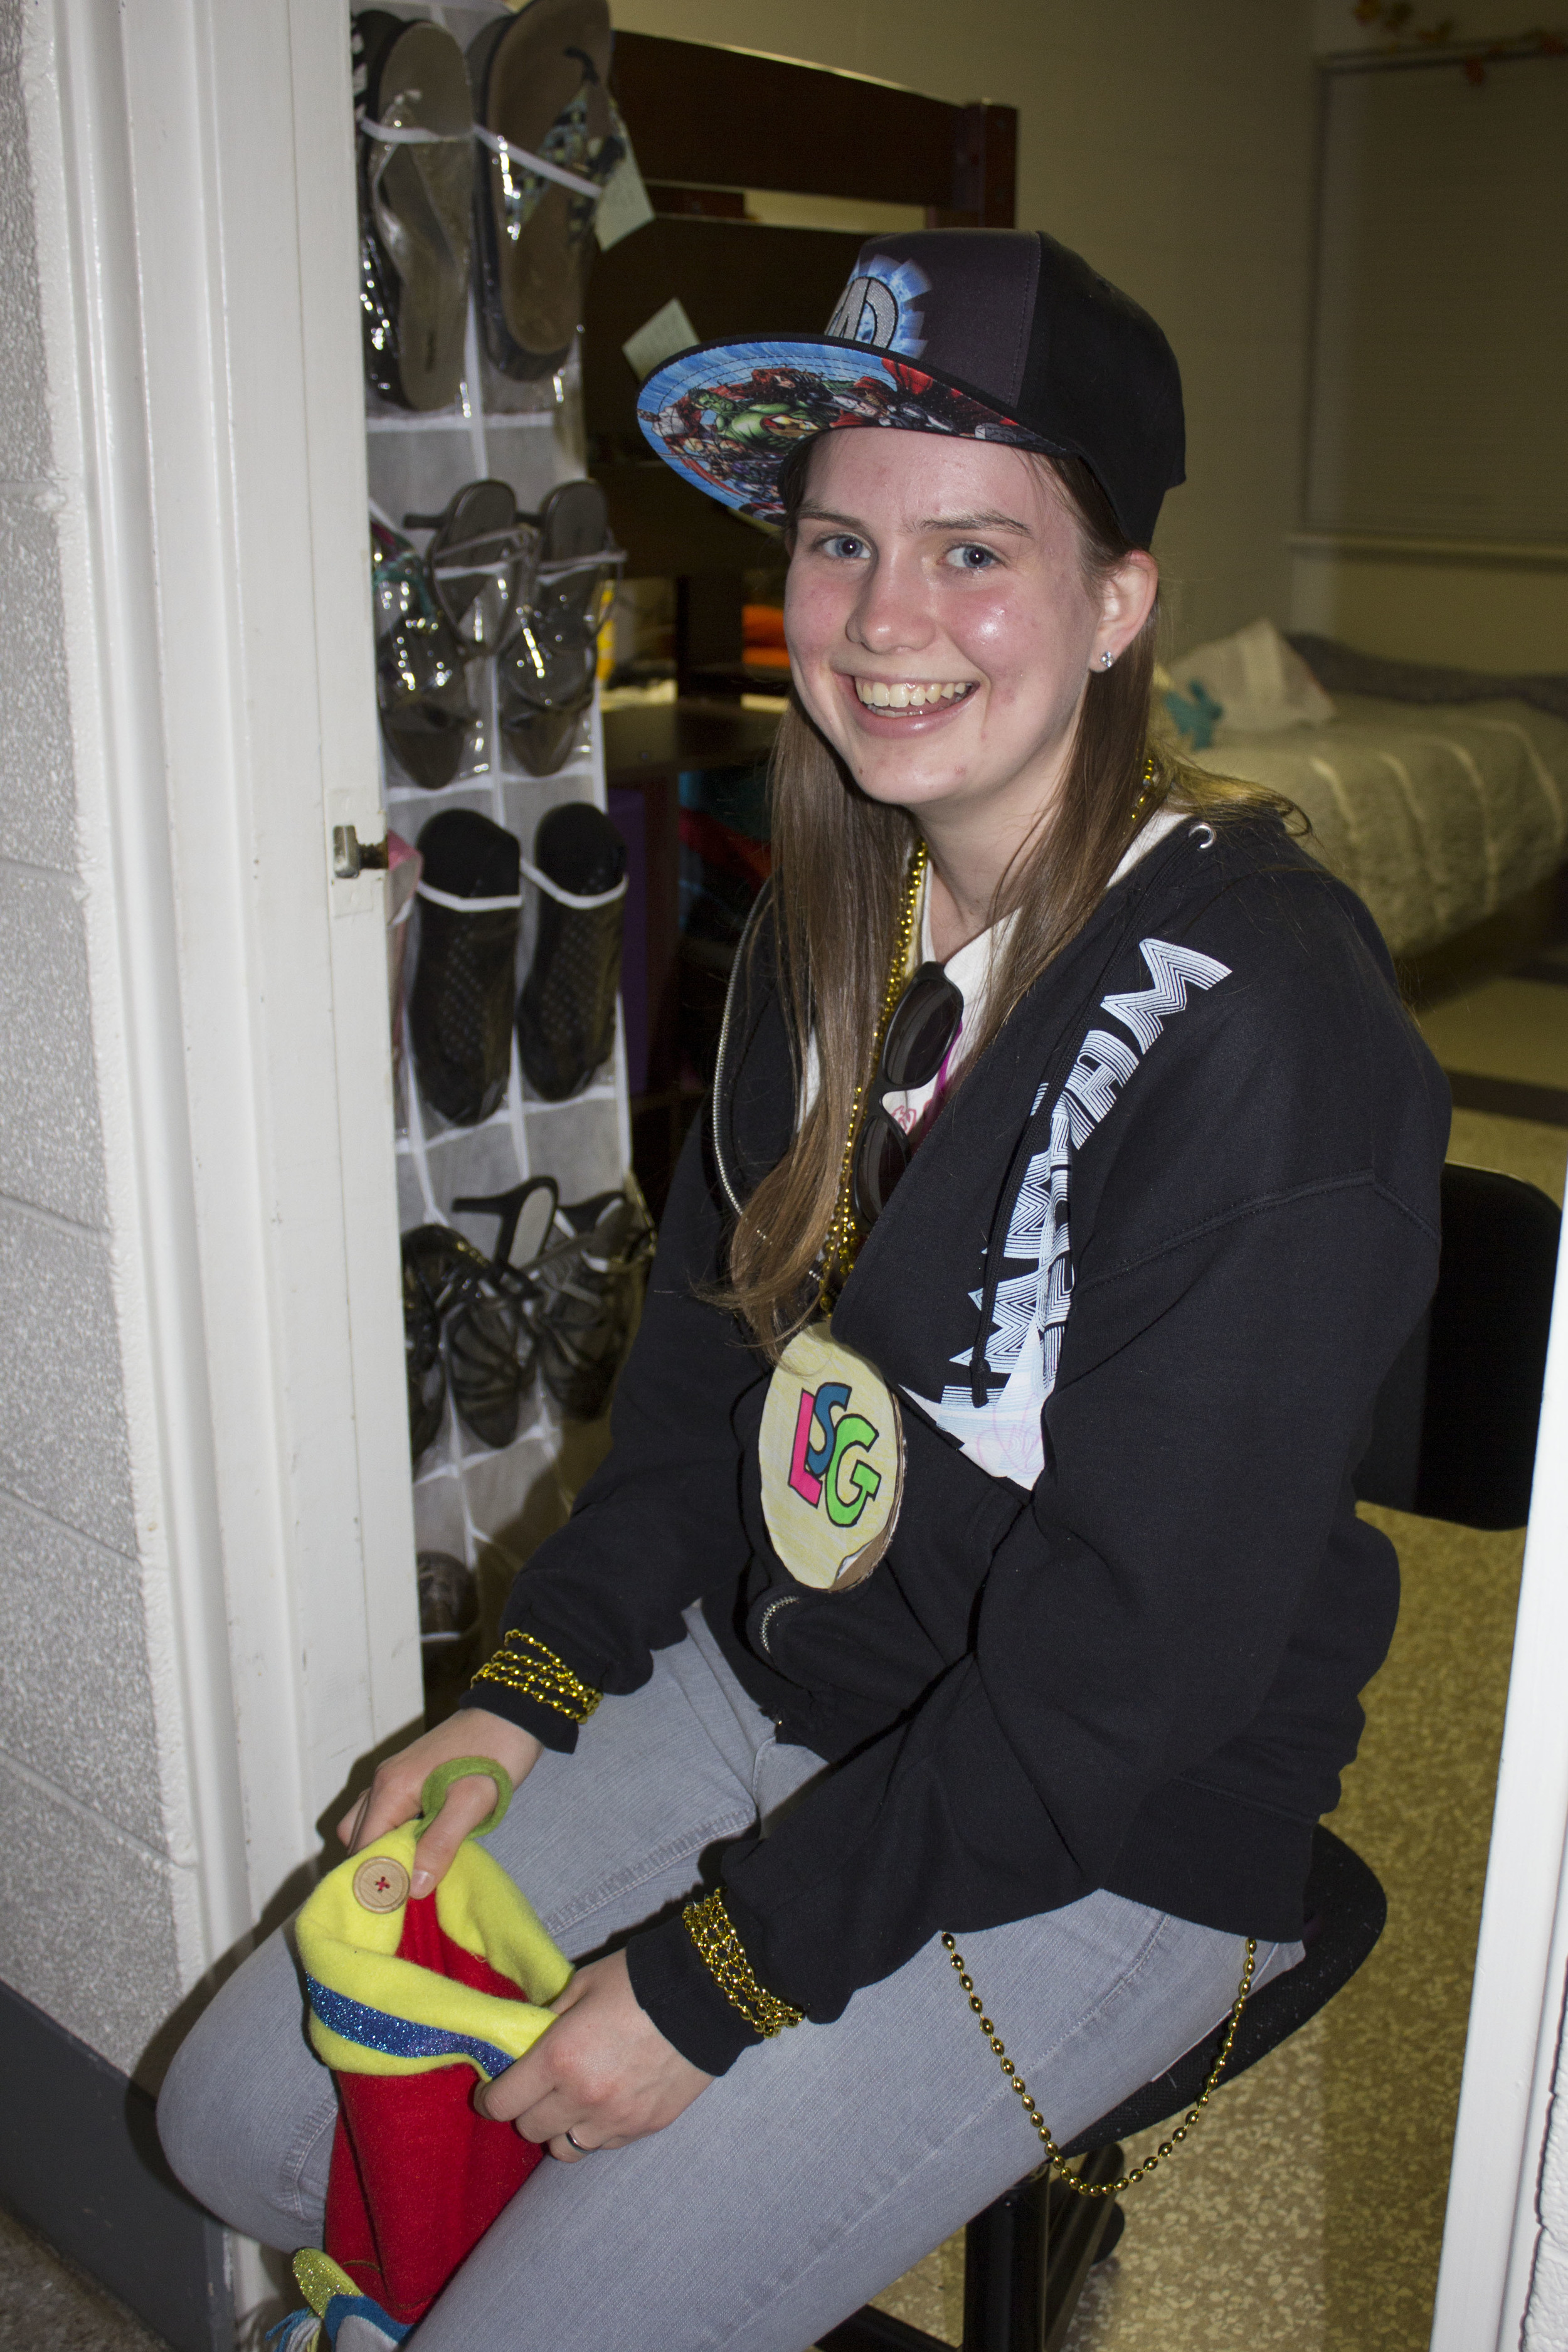  Sophomore Sarah Garrett, dressed as a gangster, holds her stocking full of candy to hand out to children passing by. 